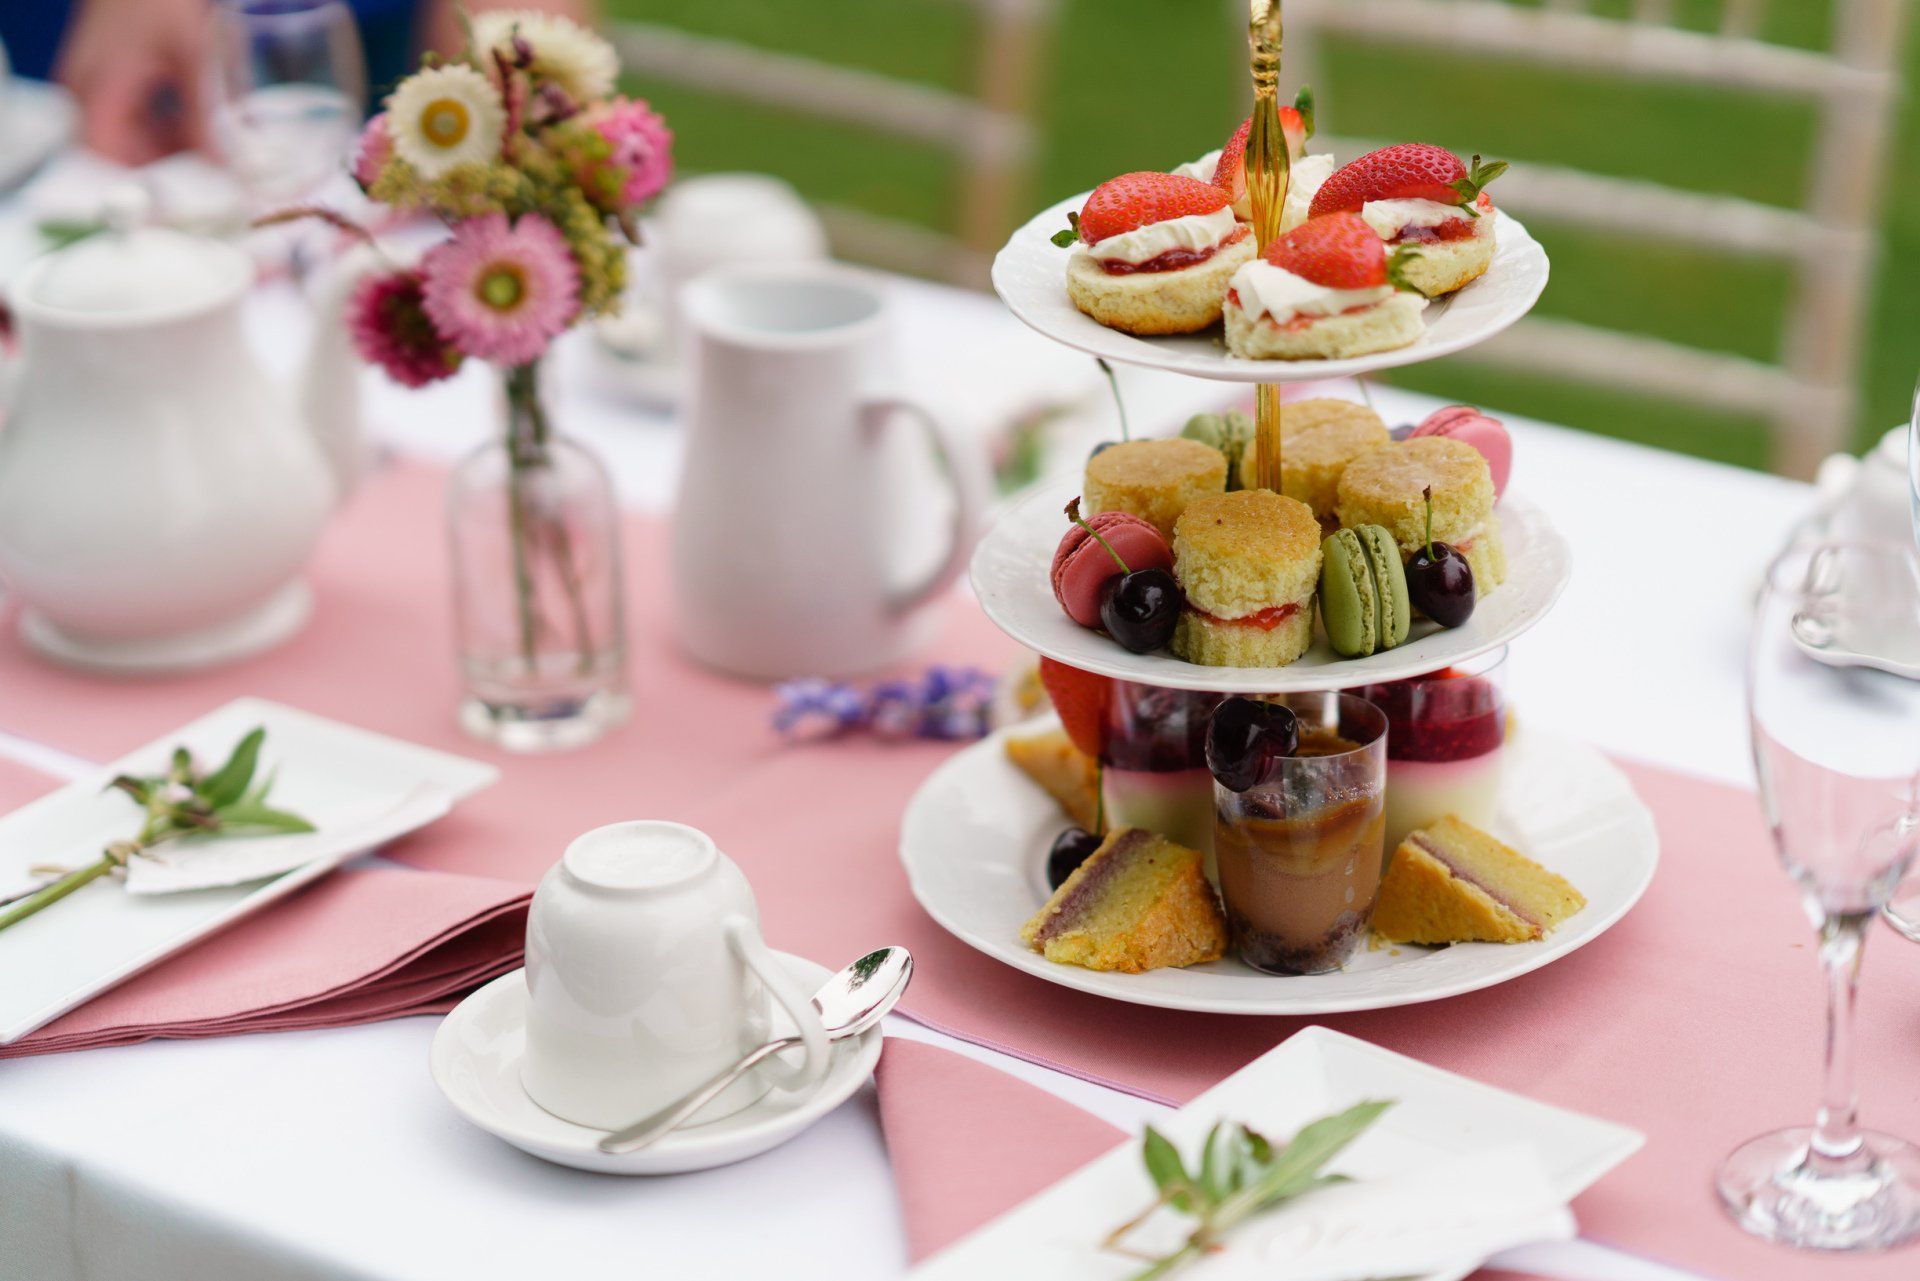 Afternoon tea by Loose Moose Catering at Sunninghill Wedding Venue in Dorset